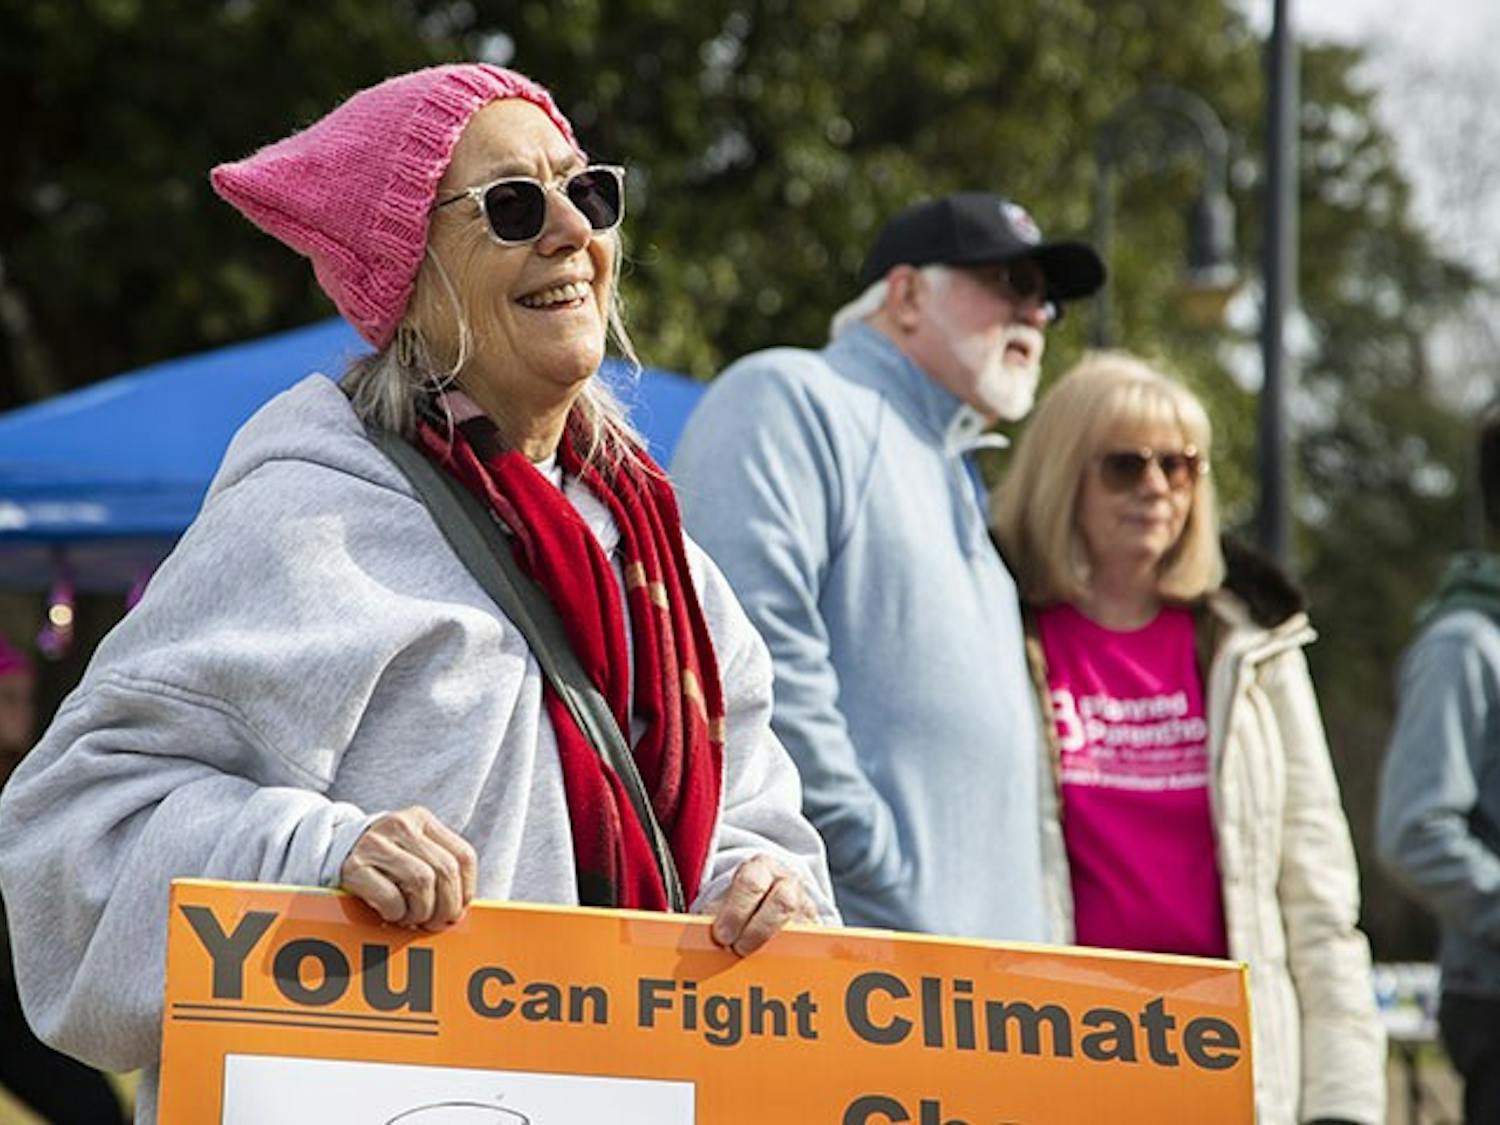 Cathy Cob, Teacher
Cathy Cobb is a teacher from Aiken, South Carolina. She drove to the march and held up her sign, which advocated for climate change. Climate change was a topic brought up during the march.